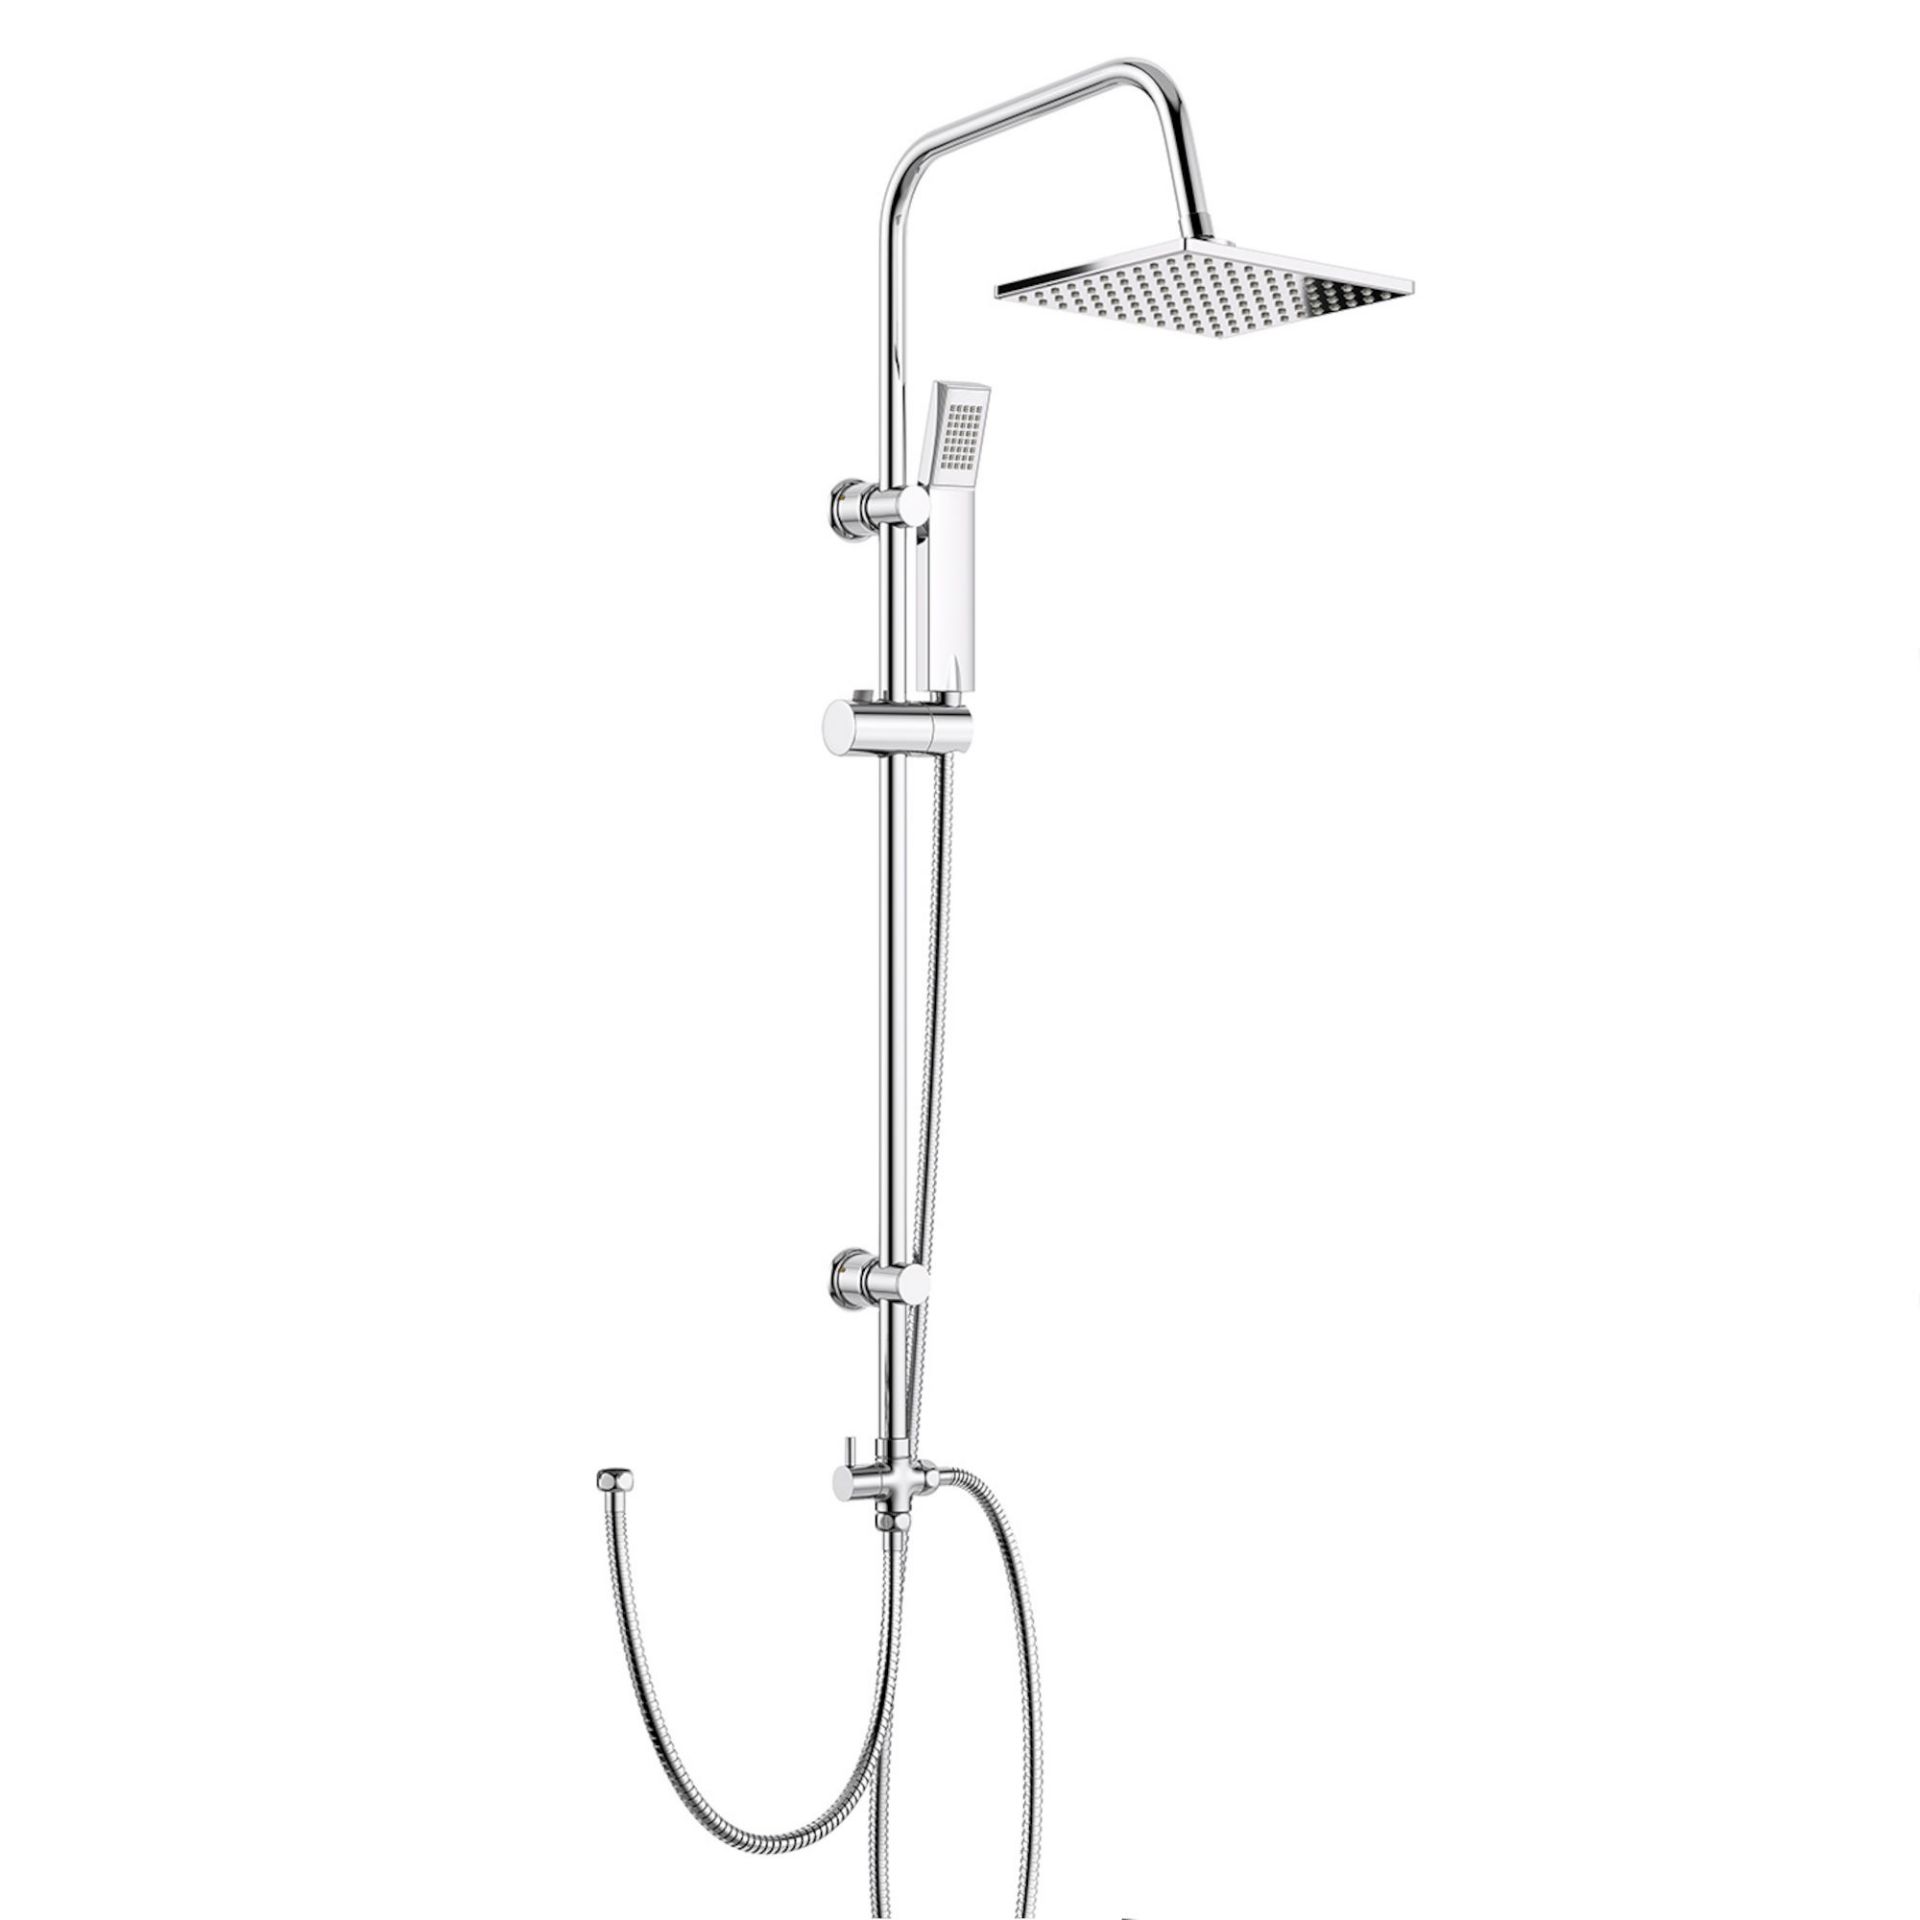 (SM6) 200mm Square Head, Riser Rail & Handheld Kit. Quality stainless steel shower head with Easy - Image 2 of 4